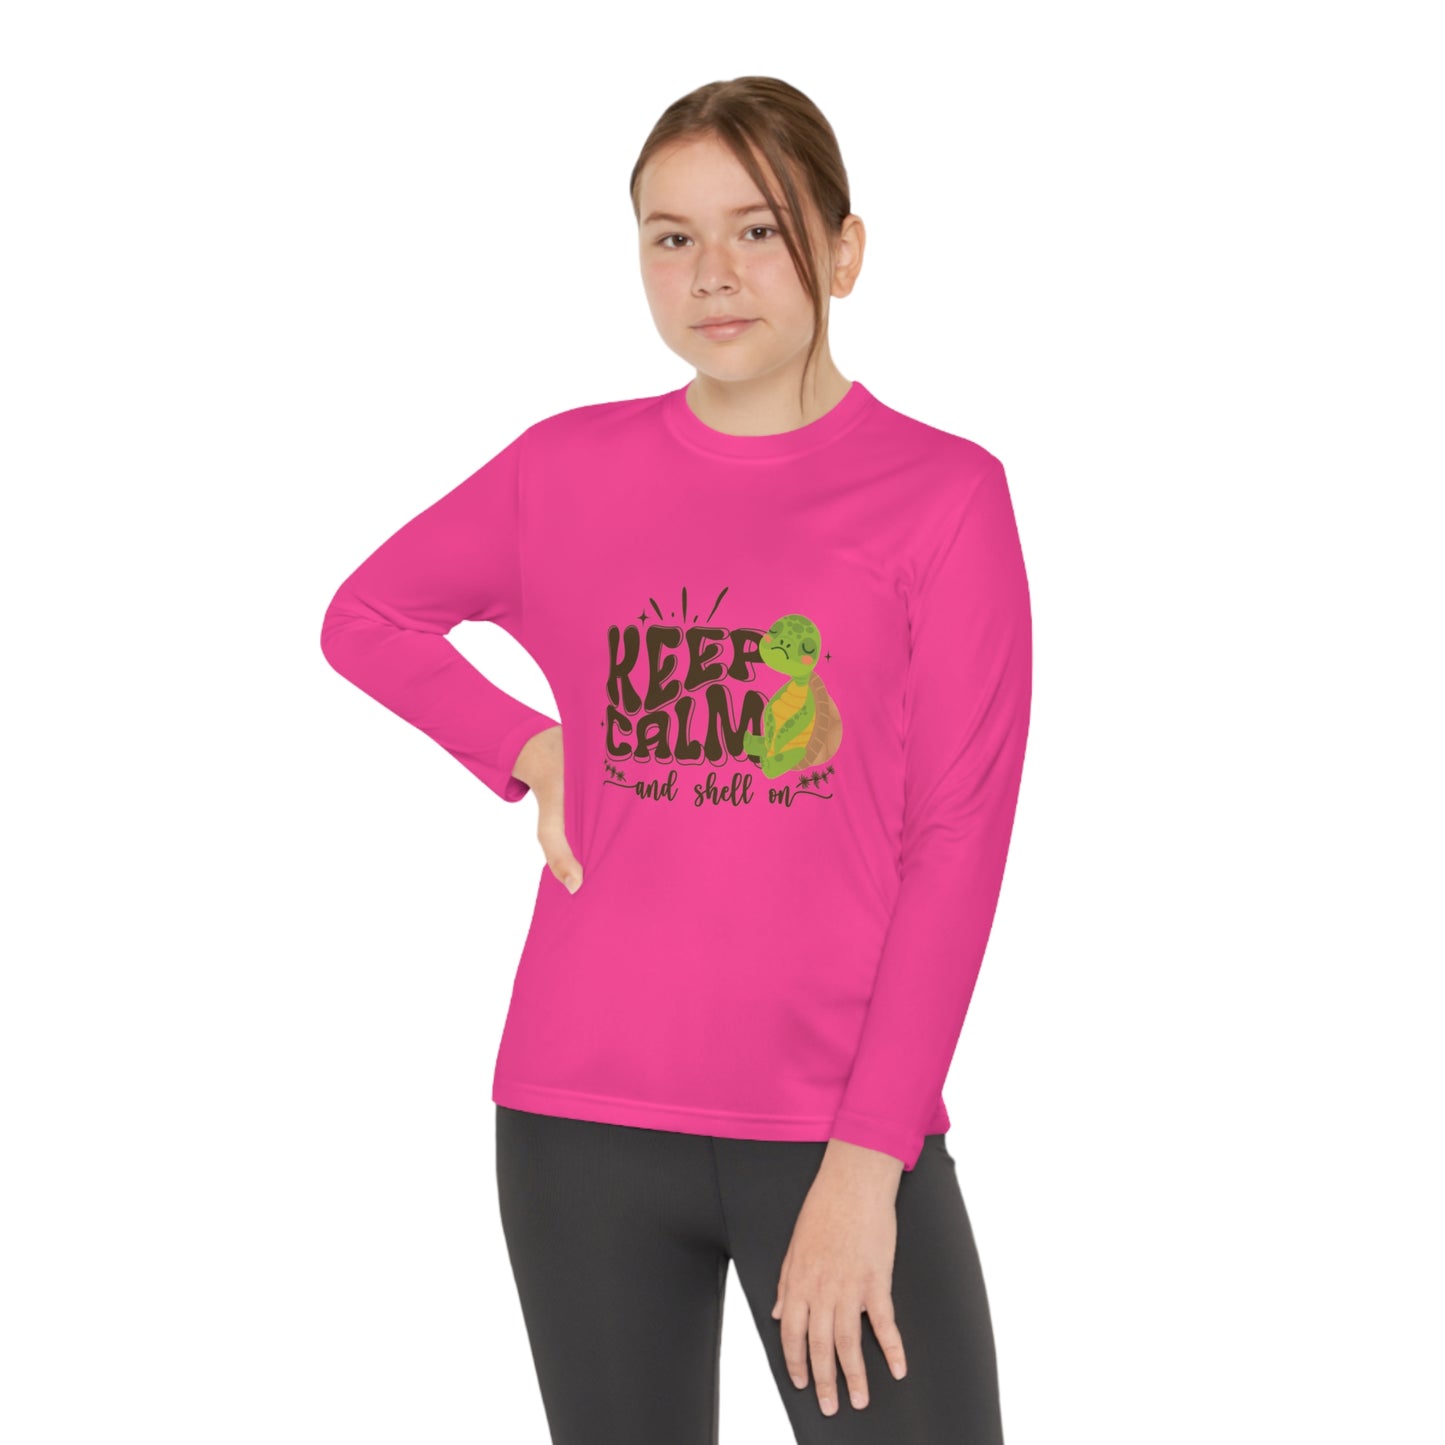 Youth Long Sleeve Competitor Tee - Keep Calm and Shell On